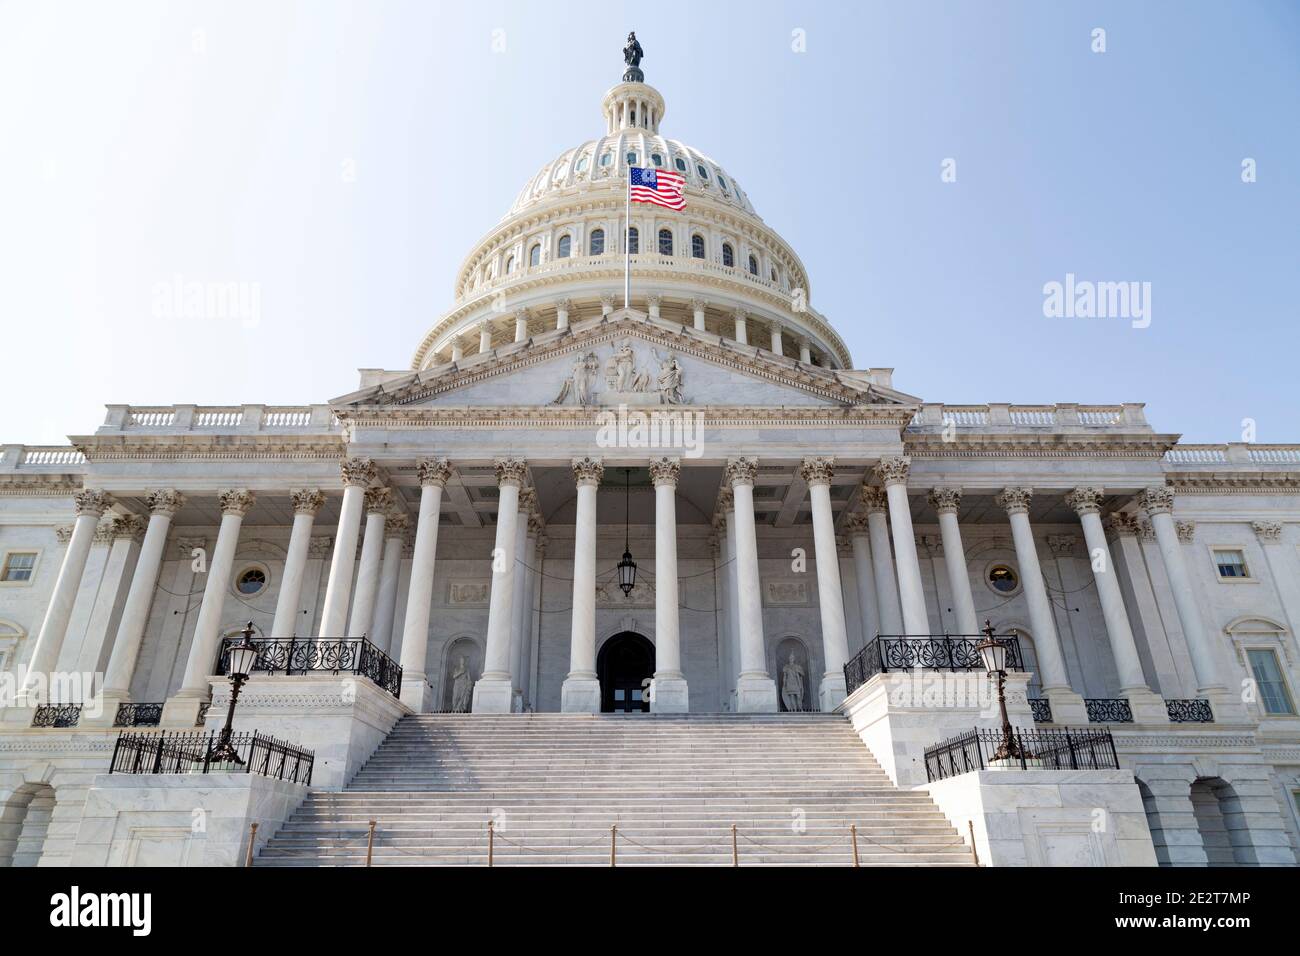 The United States Capitol in Washington DC, USA. The Capitol Building is the meeting place of the United States Senate and Congress, and is open to vi Stock Photo